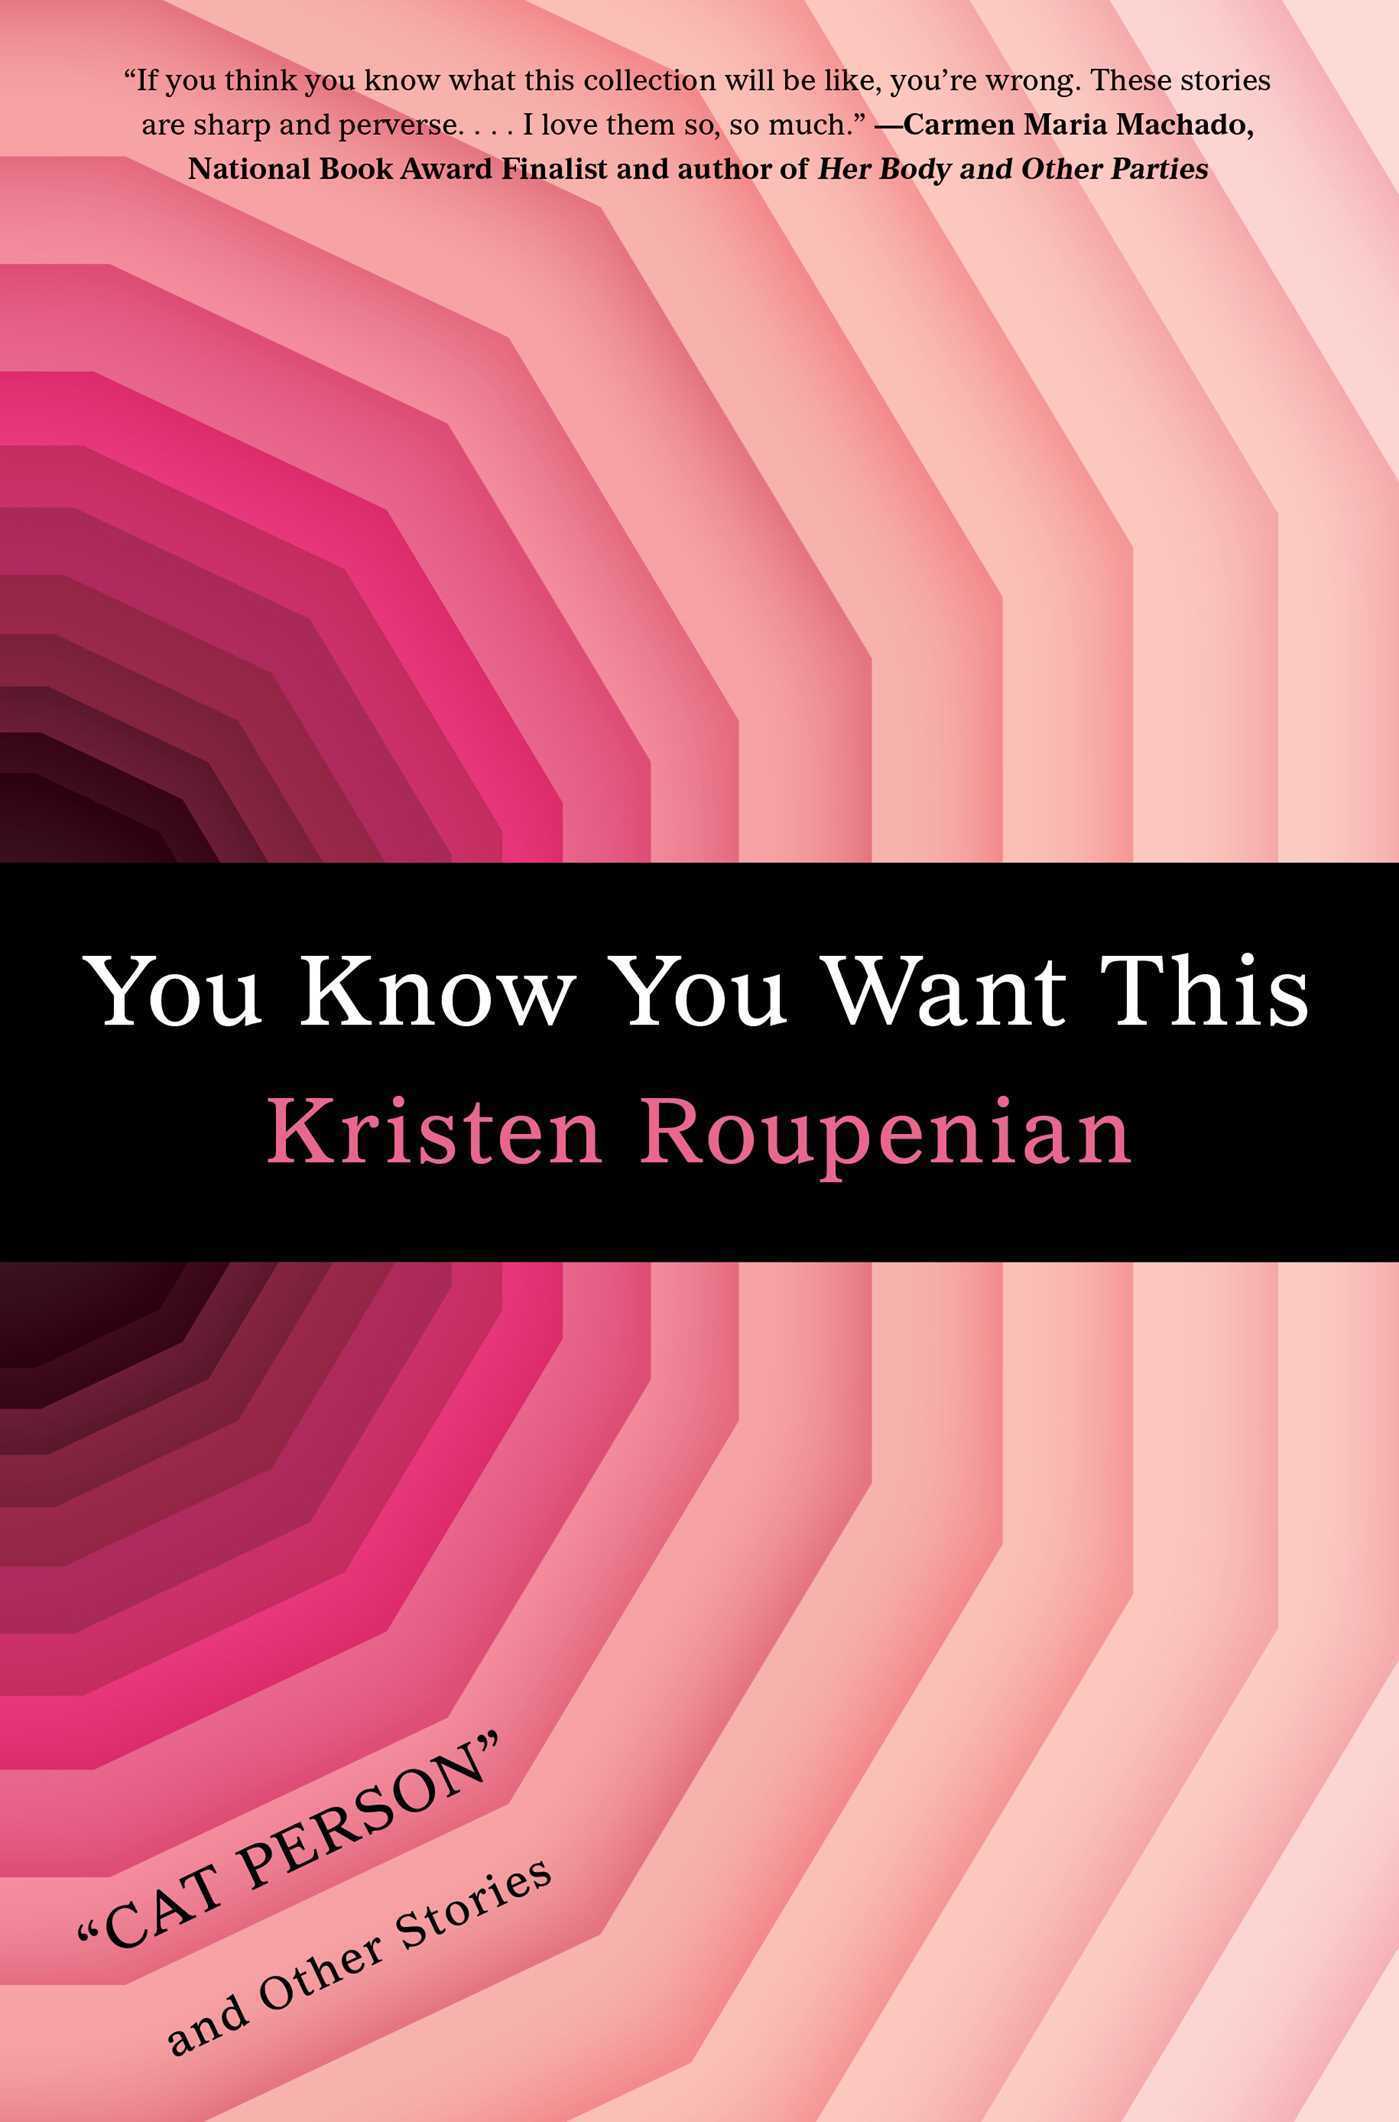 The cover of You Know You Want This: &#8220;Cat Person&#8221; and Other Stories